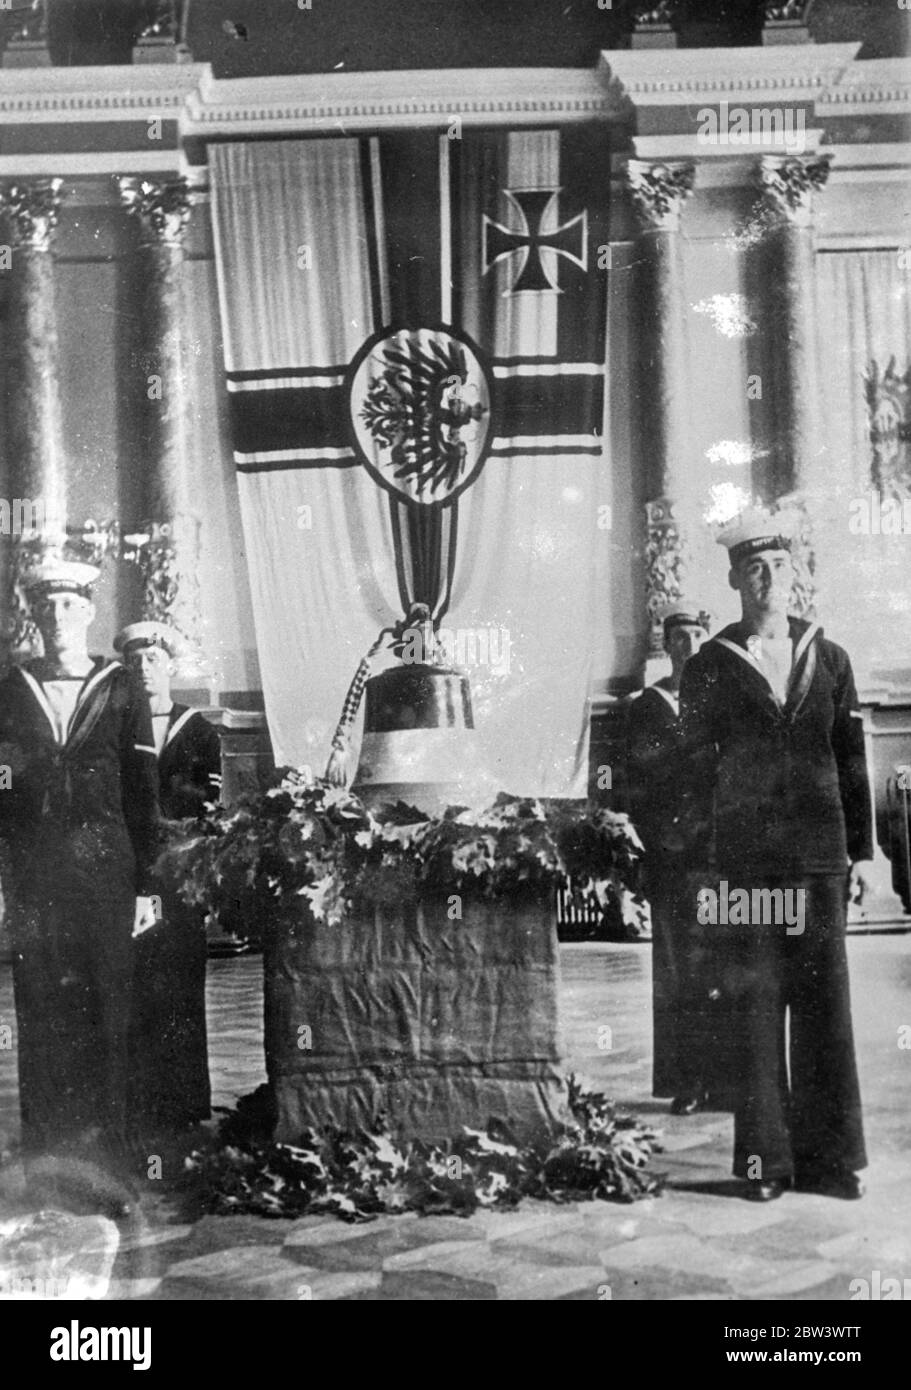 British Navy Hands Back  Hindenburg  Bell To German Navy . The ship ' s bell of the German warship  Hindenburg  which was sunk at Scapa Flow was handed back to the German Navy at Kiel by the British cruiser  Neptune  . The bell was received by General - admiral Erich Raeder , commander - in - chief of the German Navy . Photo shows : British sailors from the  Neptune  standing guard over the  Hindenburg  bell at Kiel . 17 Aug 1936 Stock Photo